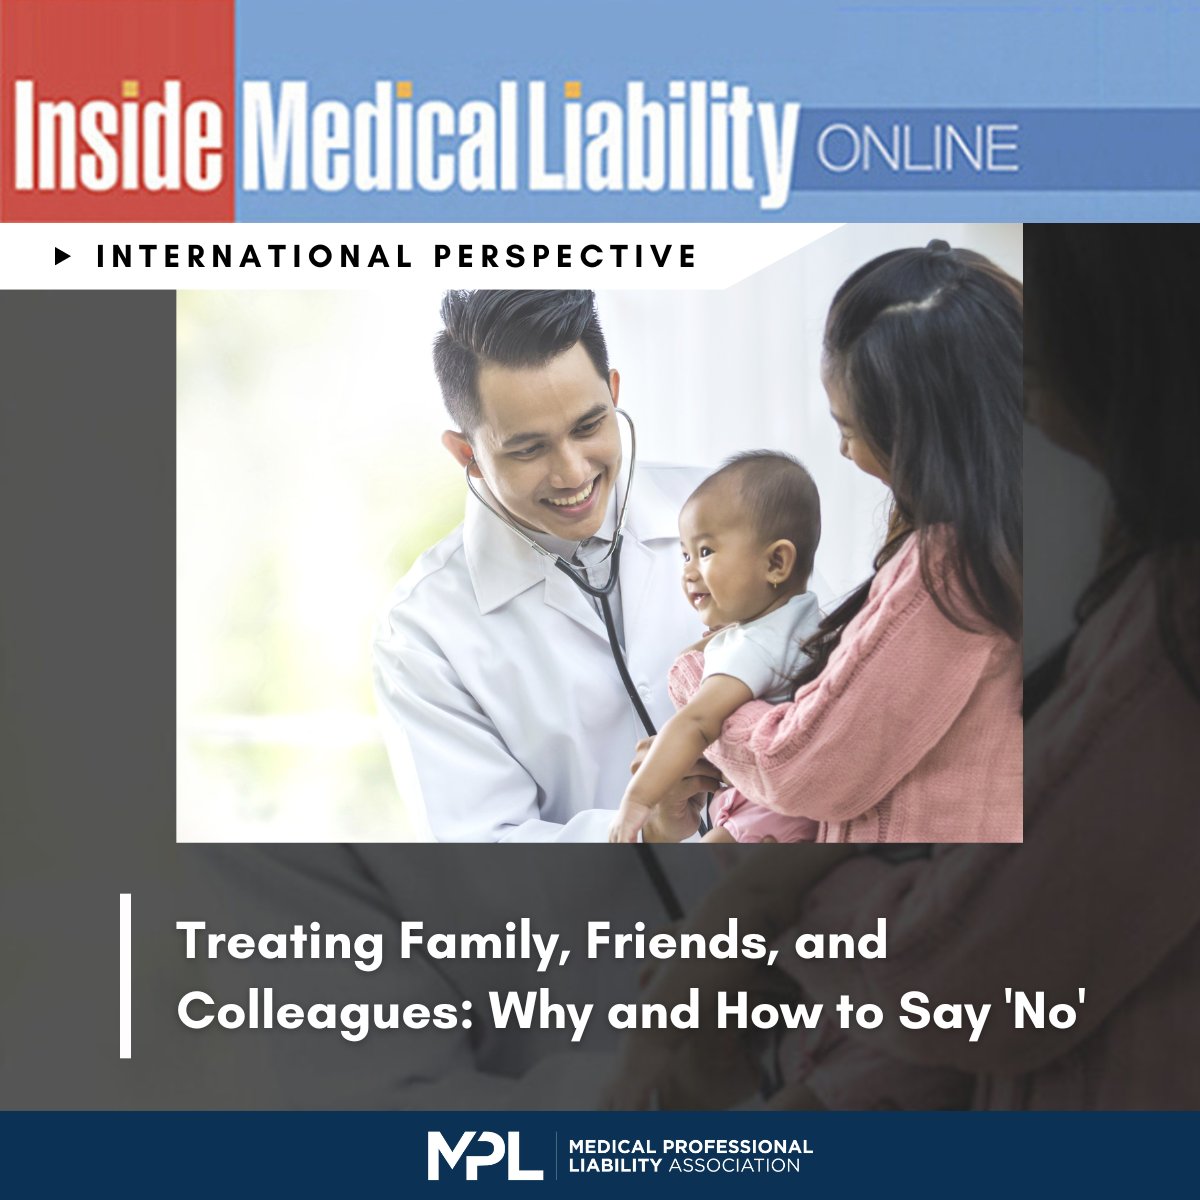 Practicing physicians often question whether it is appropriate for them to treat family, friends, or colleagues. Learn how and why to say 'no' to these requests in the latest IML Online article: bit.ly/43TdCm8